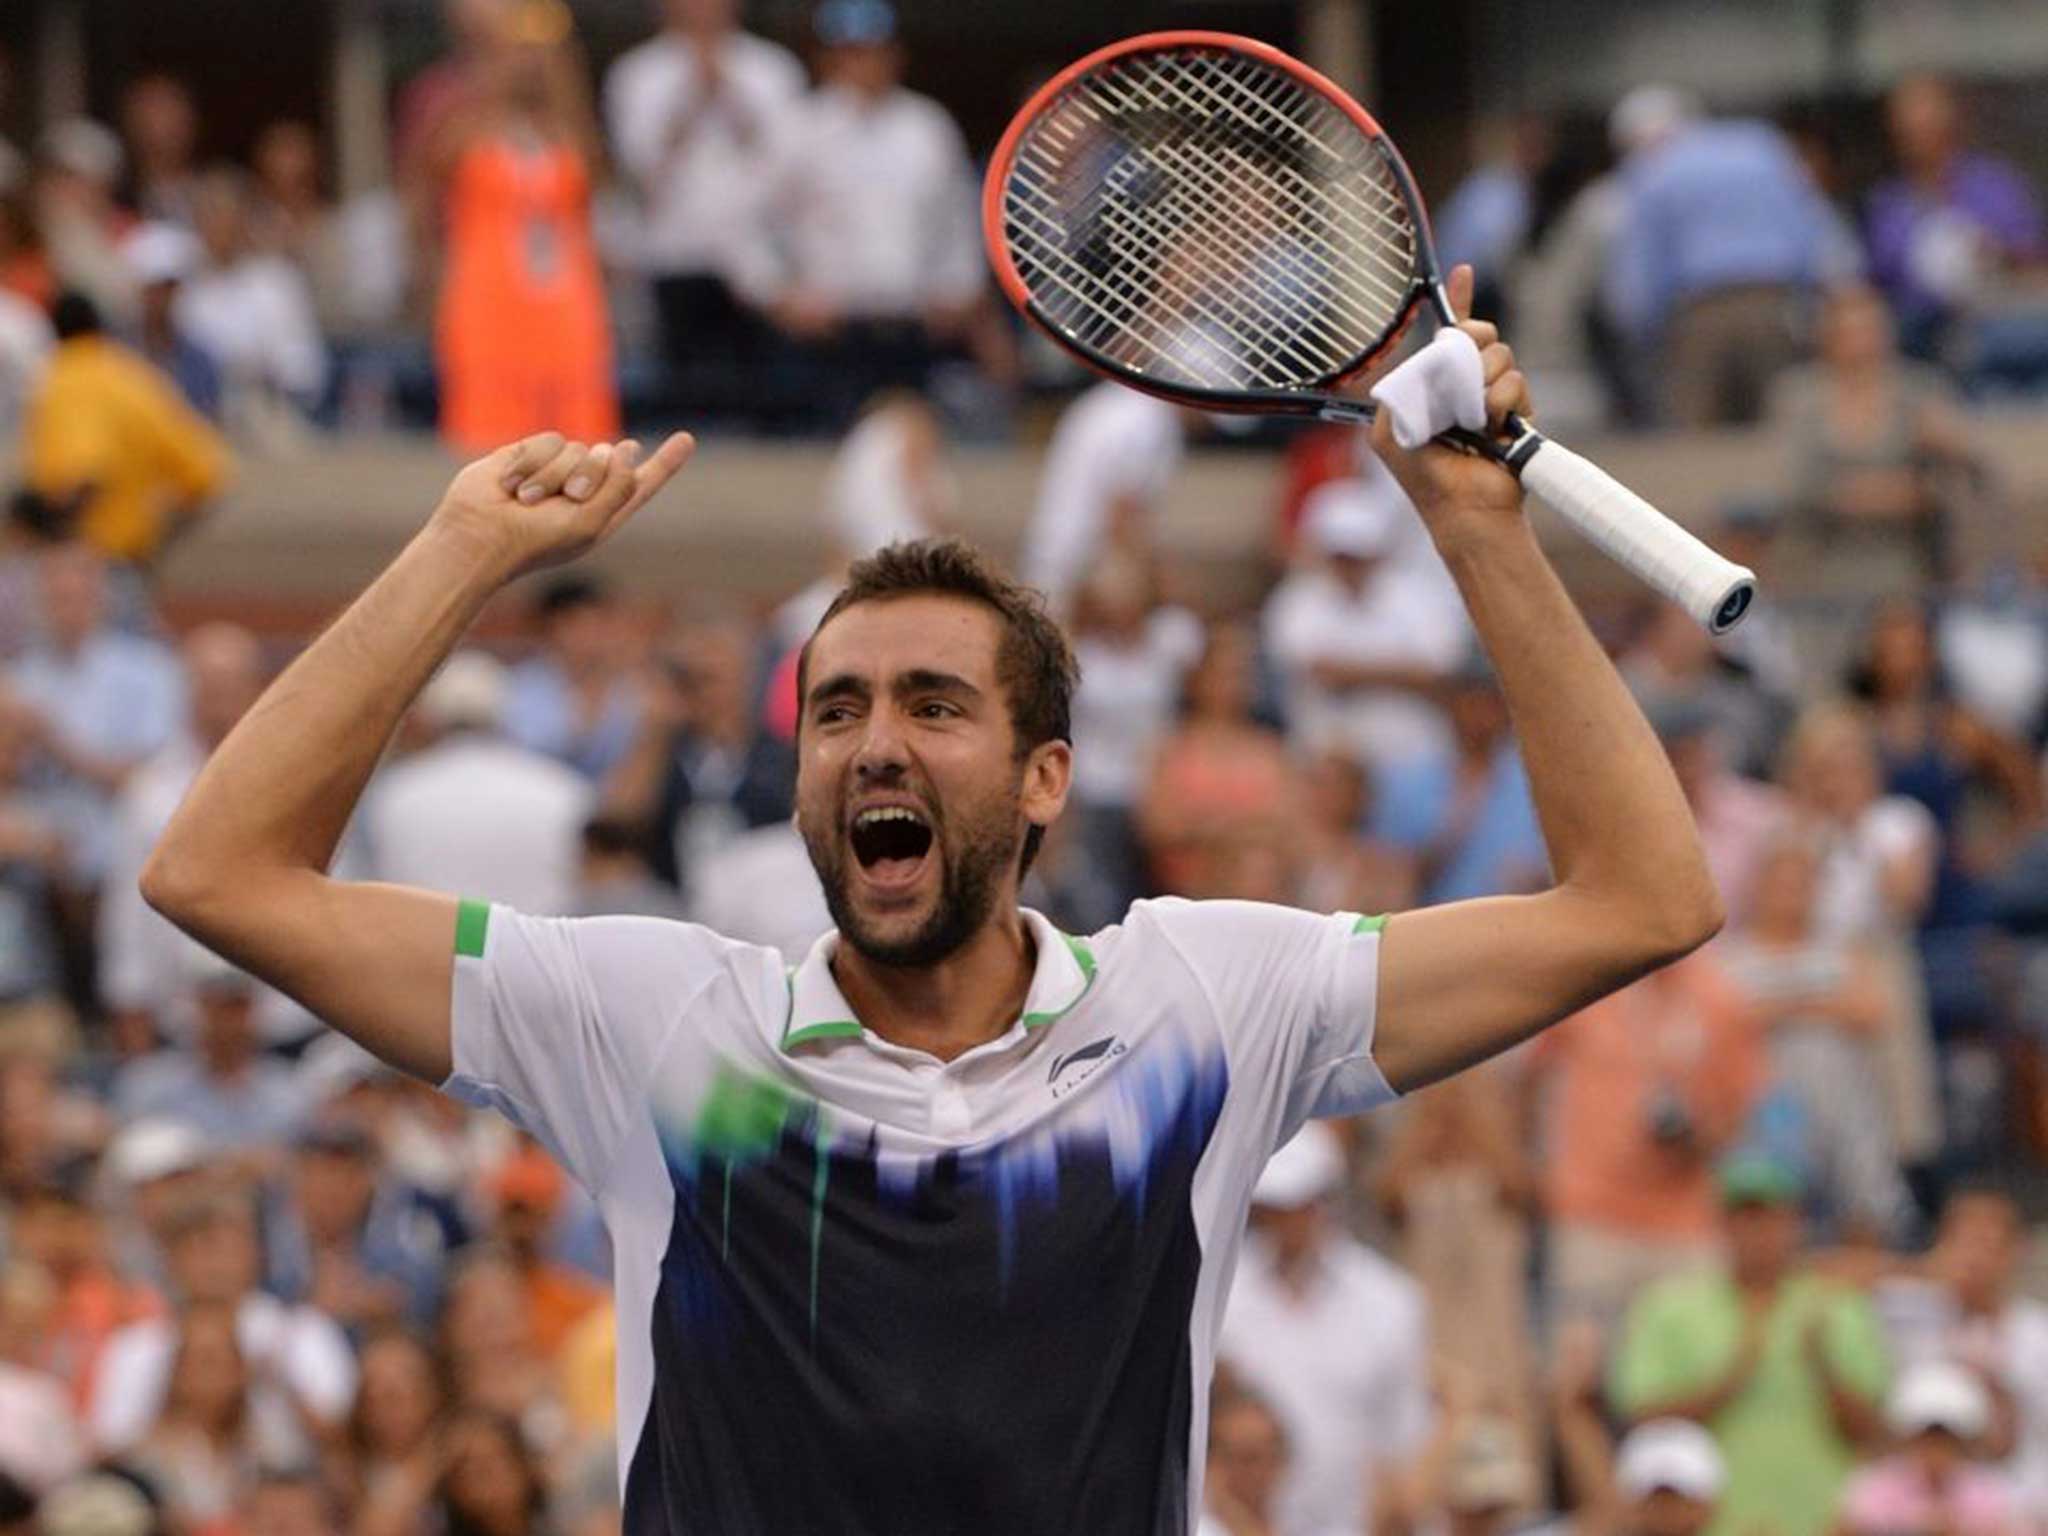 Marin Cilic celebrates after beating Federer